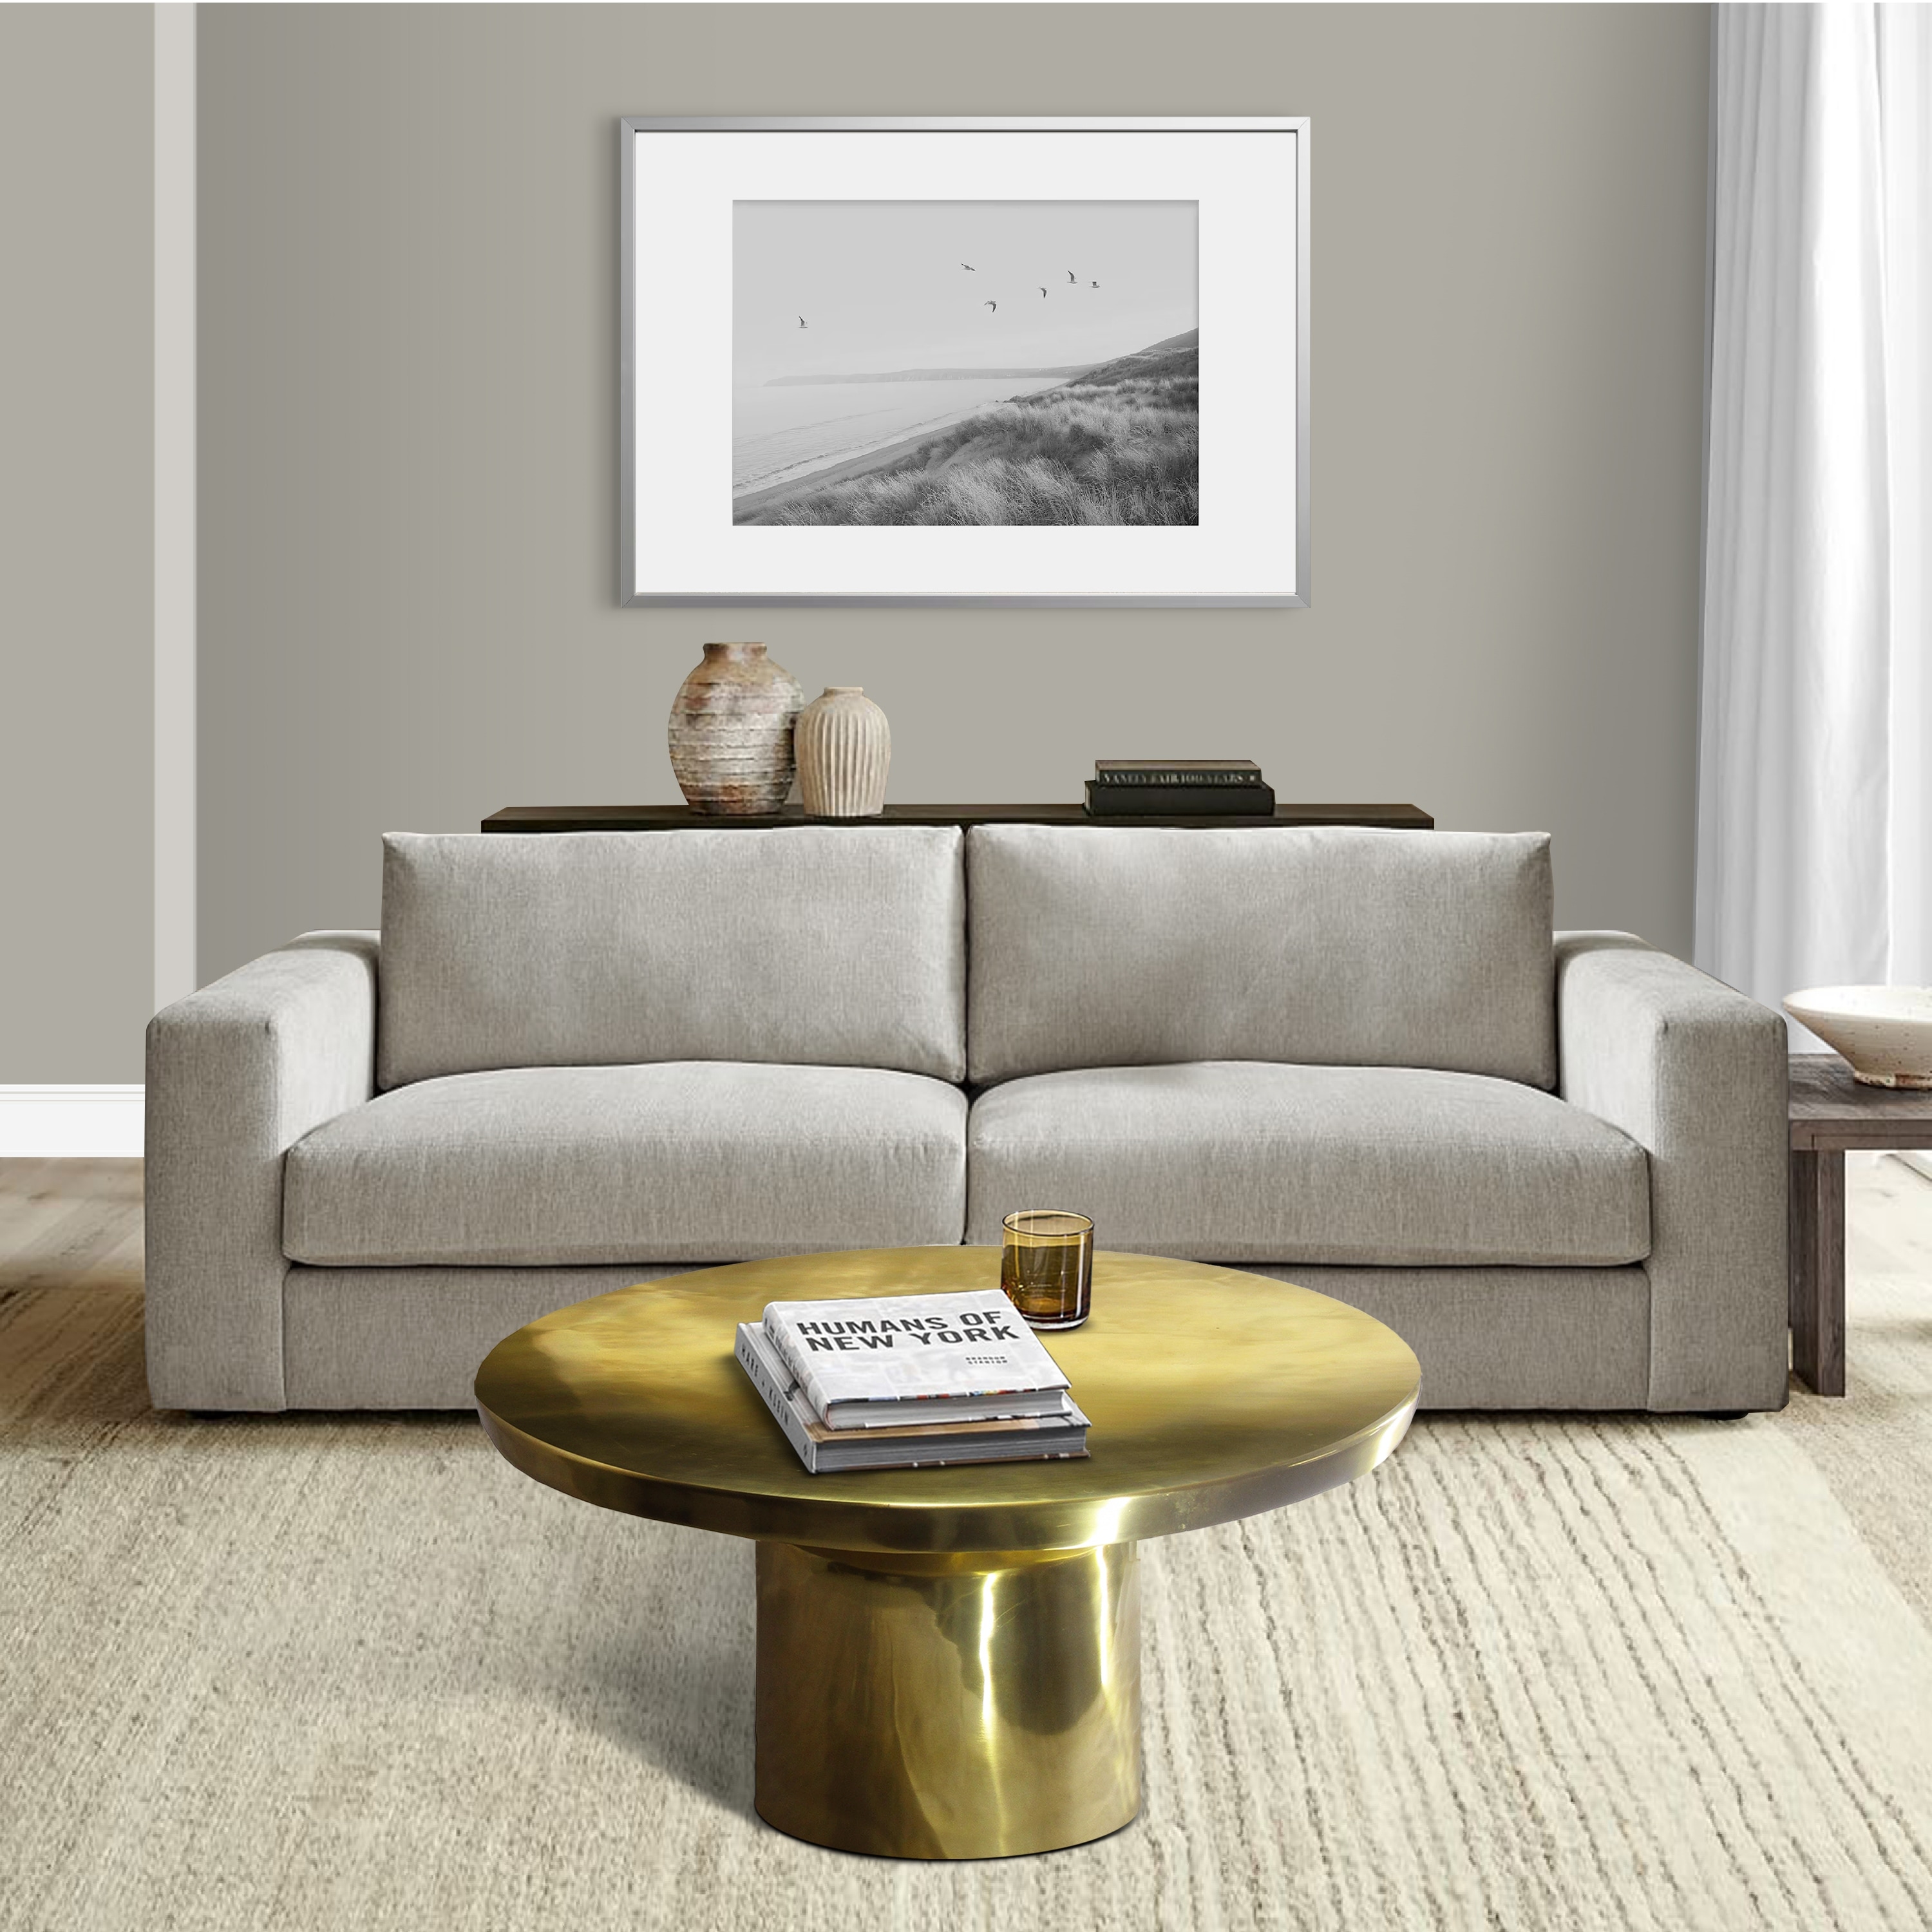 The Urban Port Zoe 30 Inch Modern Classic Round Metal Coffee Table with Pedestal Base, Glossy Gold Brass